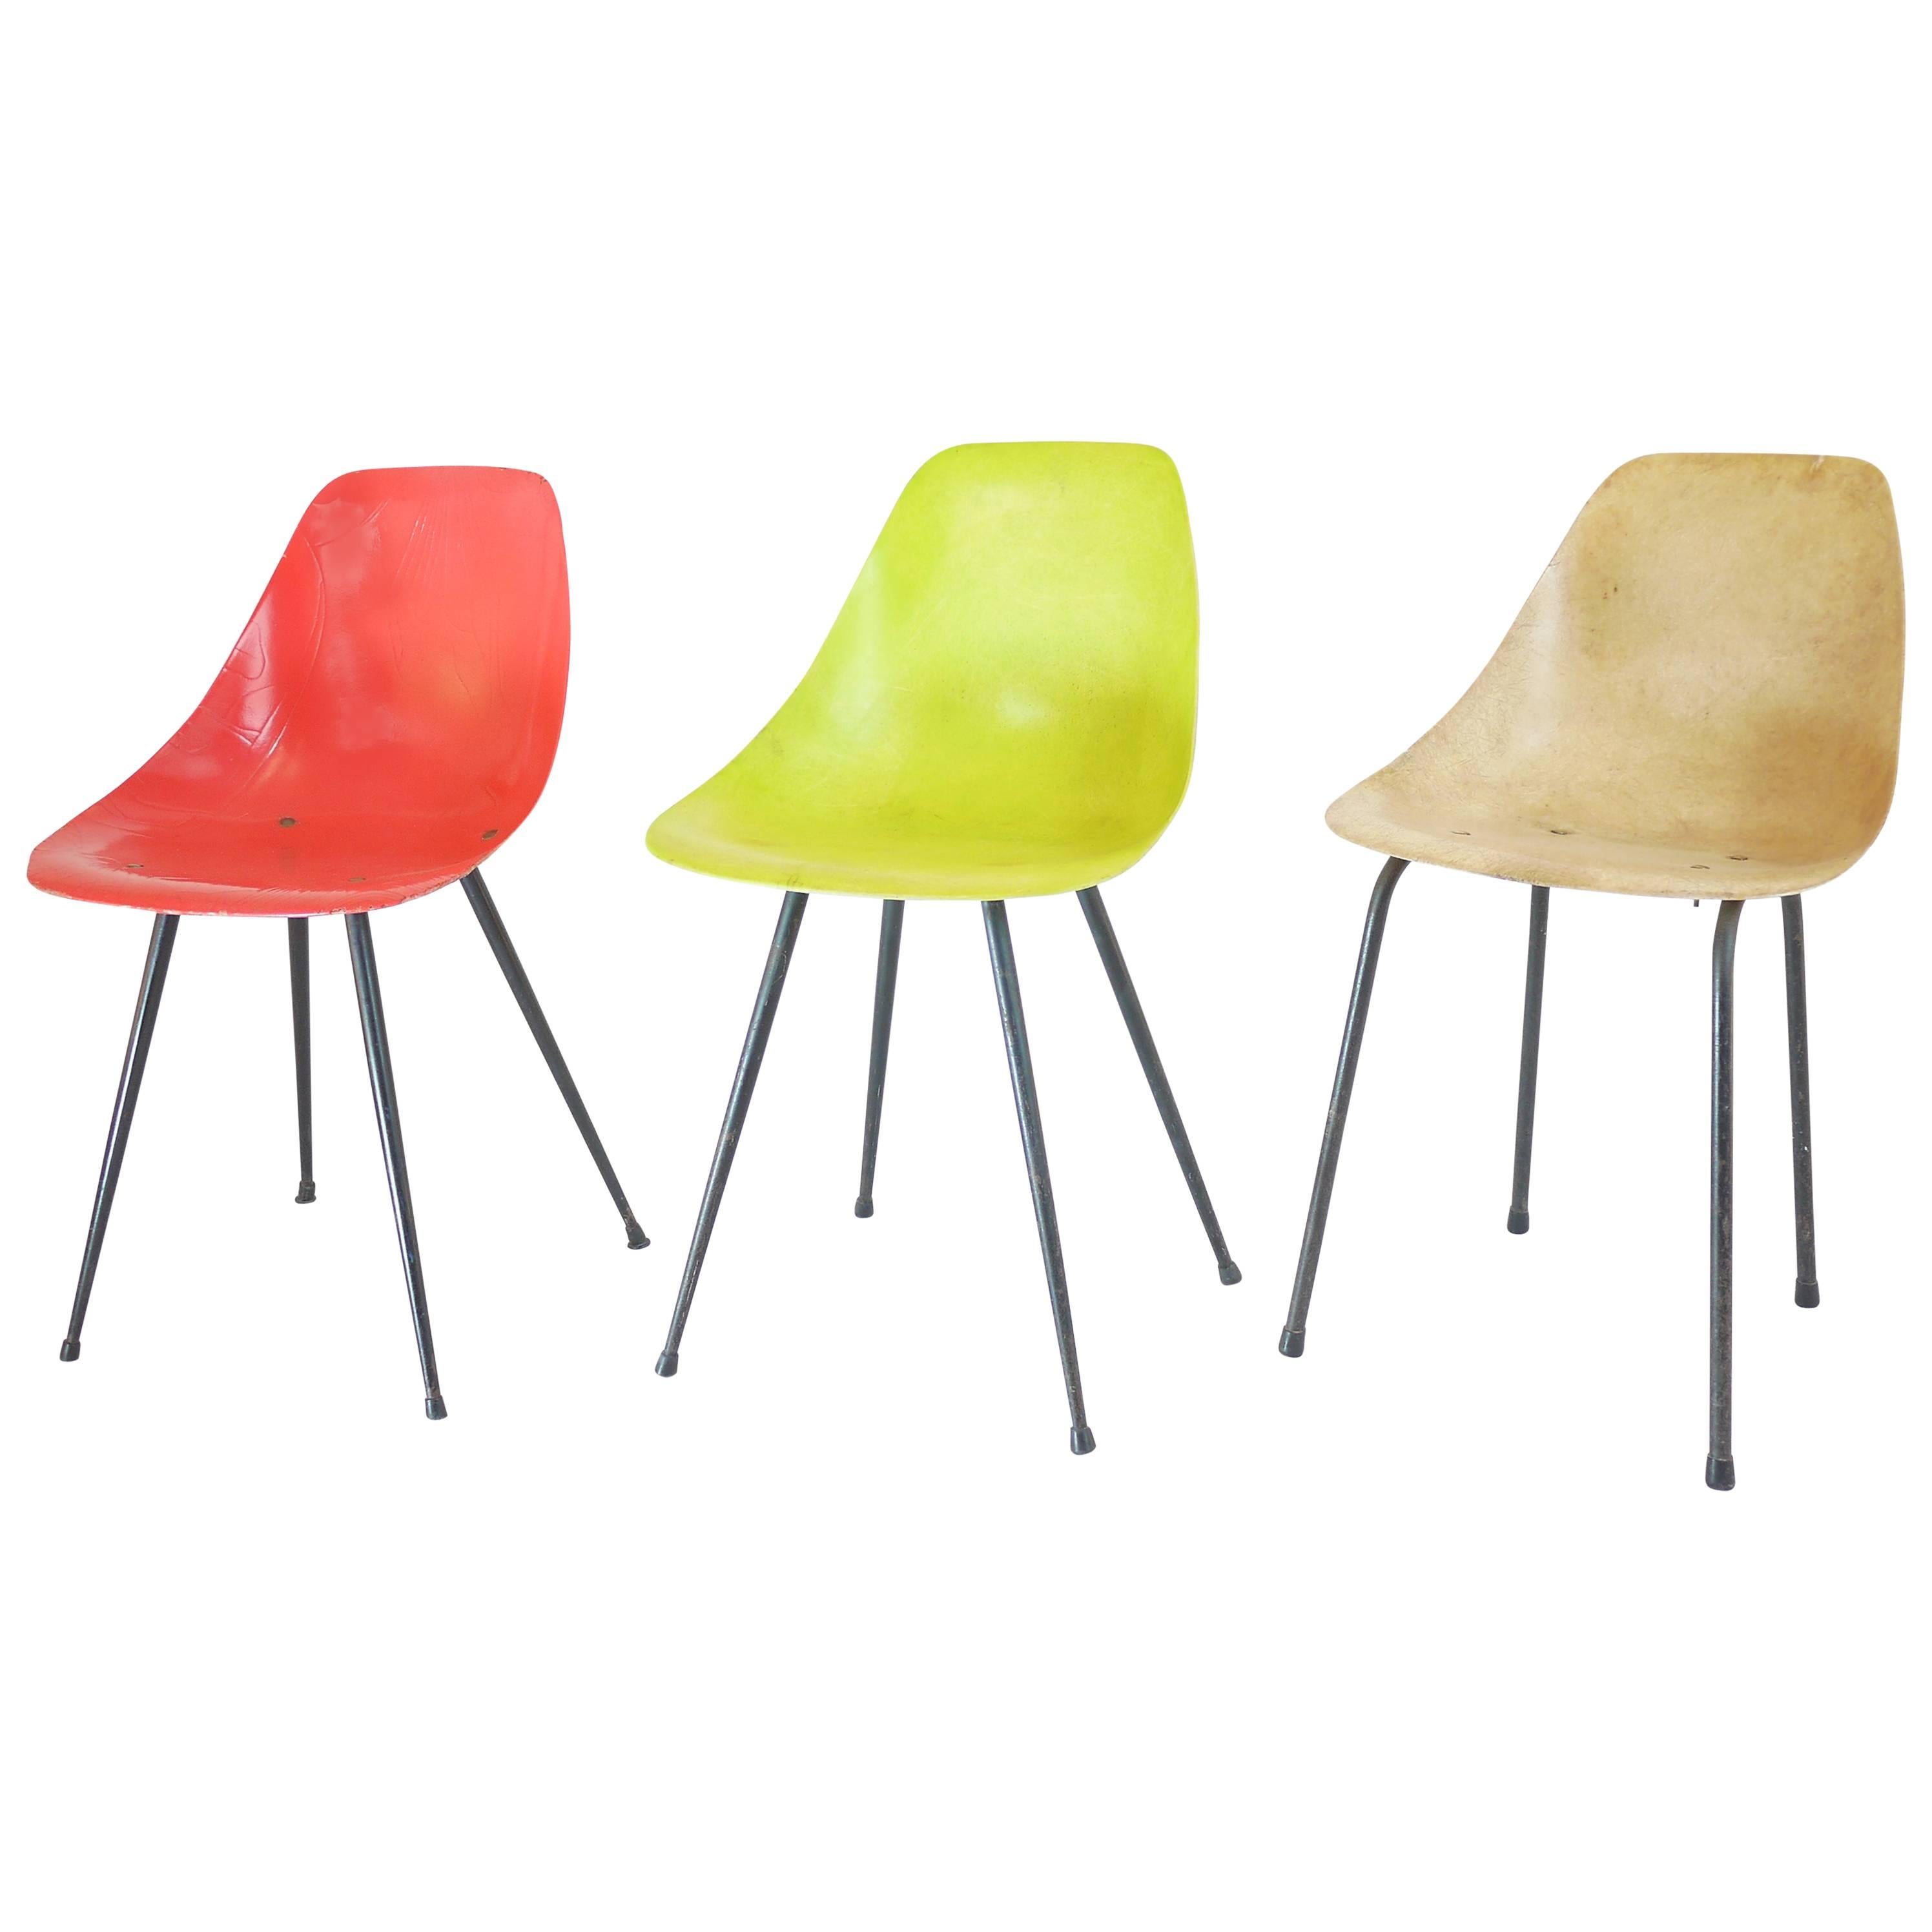 Set of Coccinelle Chairs by René-Jean Caillette, 1957 For Sale